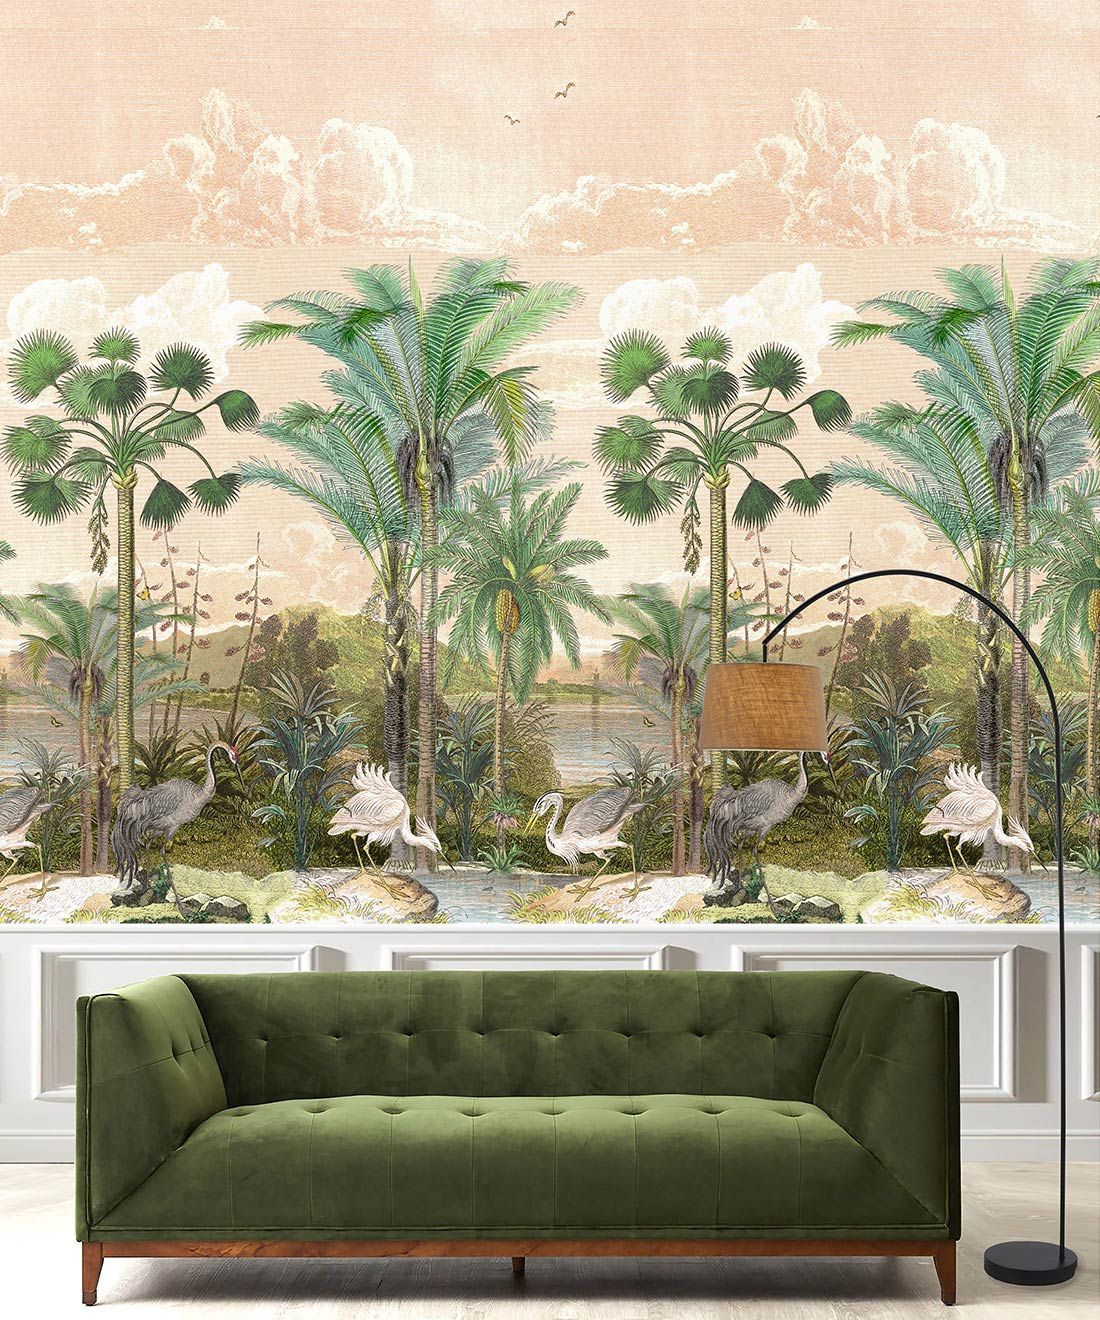 South Asian Subcontinent Wallpaper Mural •Bethany Linz • Palm Tree Mural • Pink • Insitu